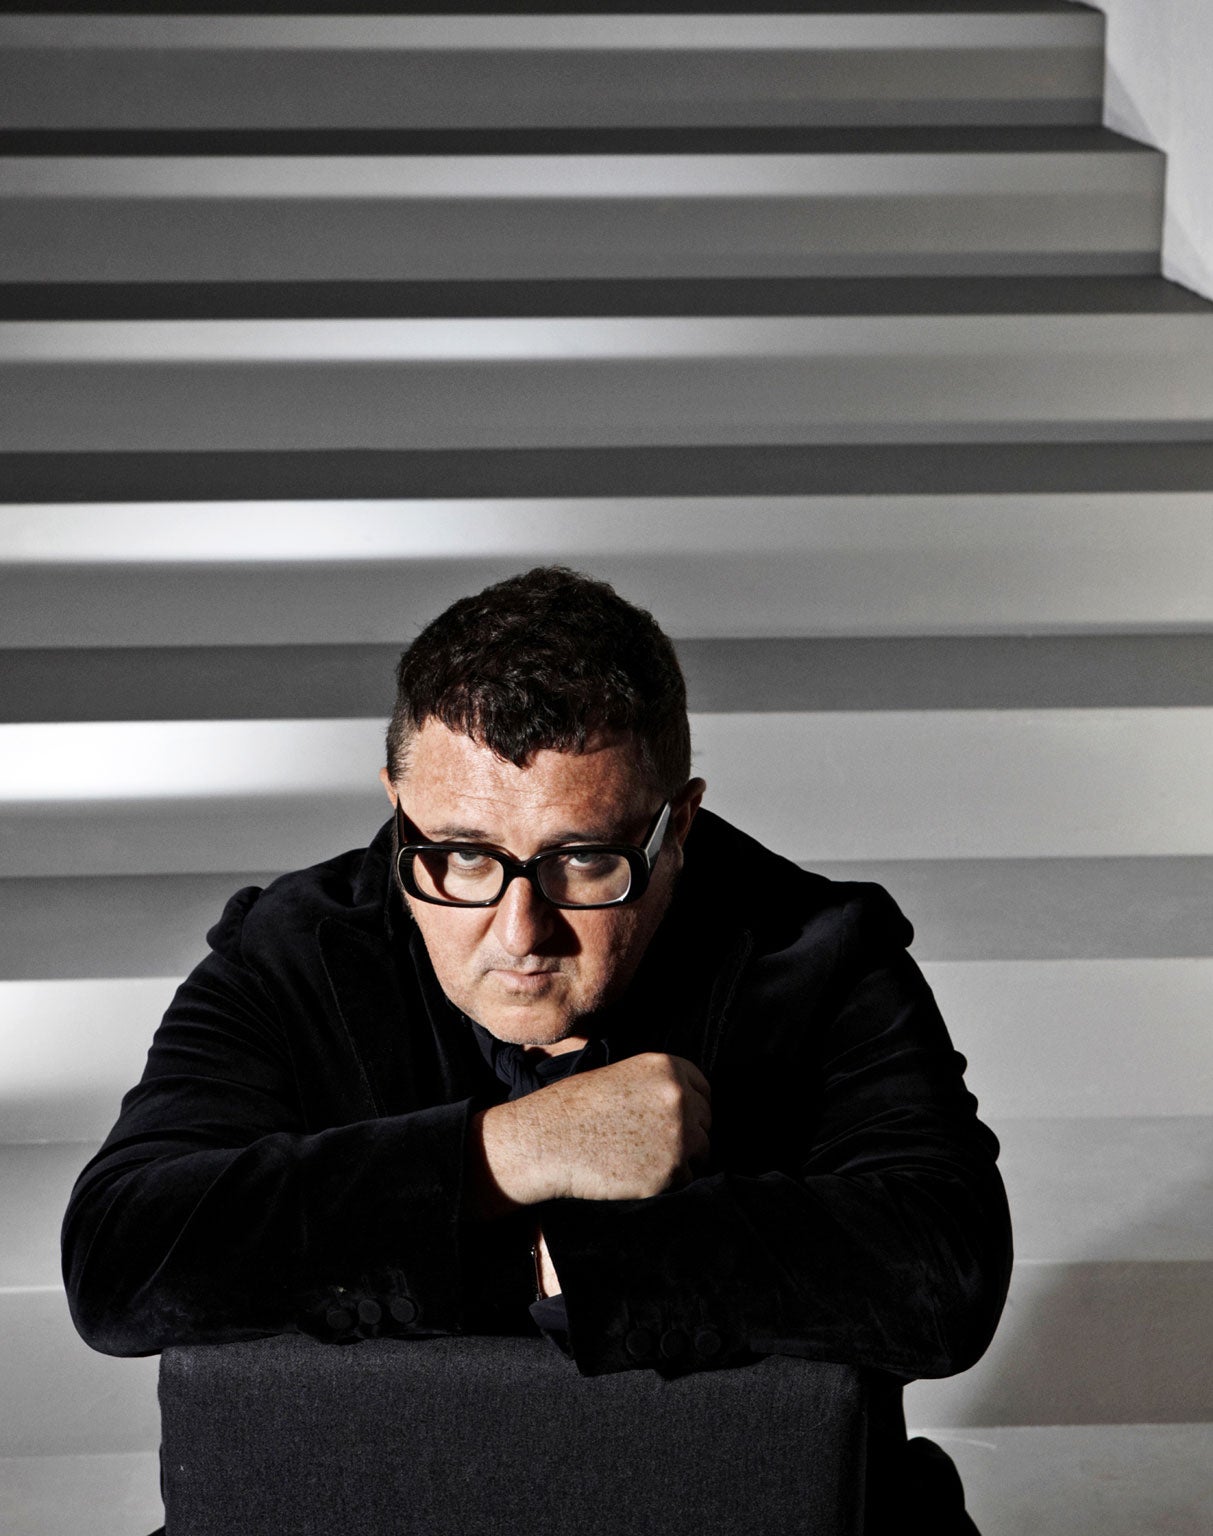 A man for all seasons: Alber Elbaz; backstage at the Lanvin spring/summer 13 show in Paris